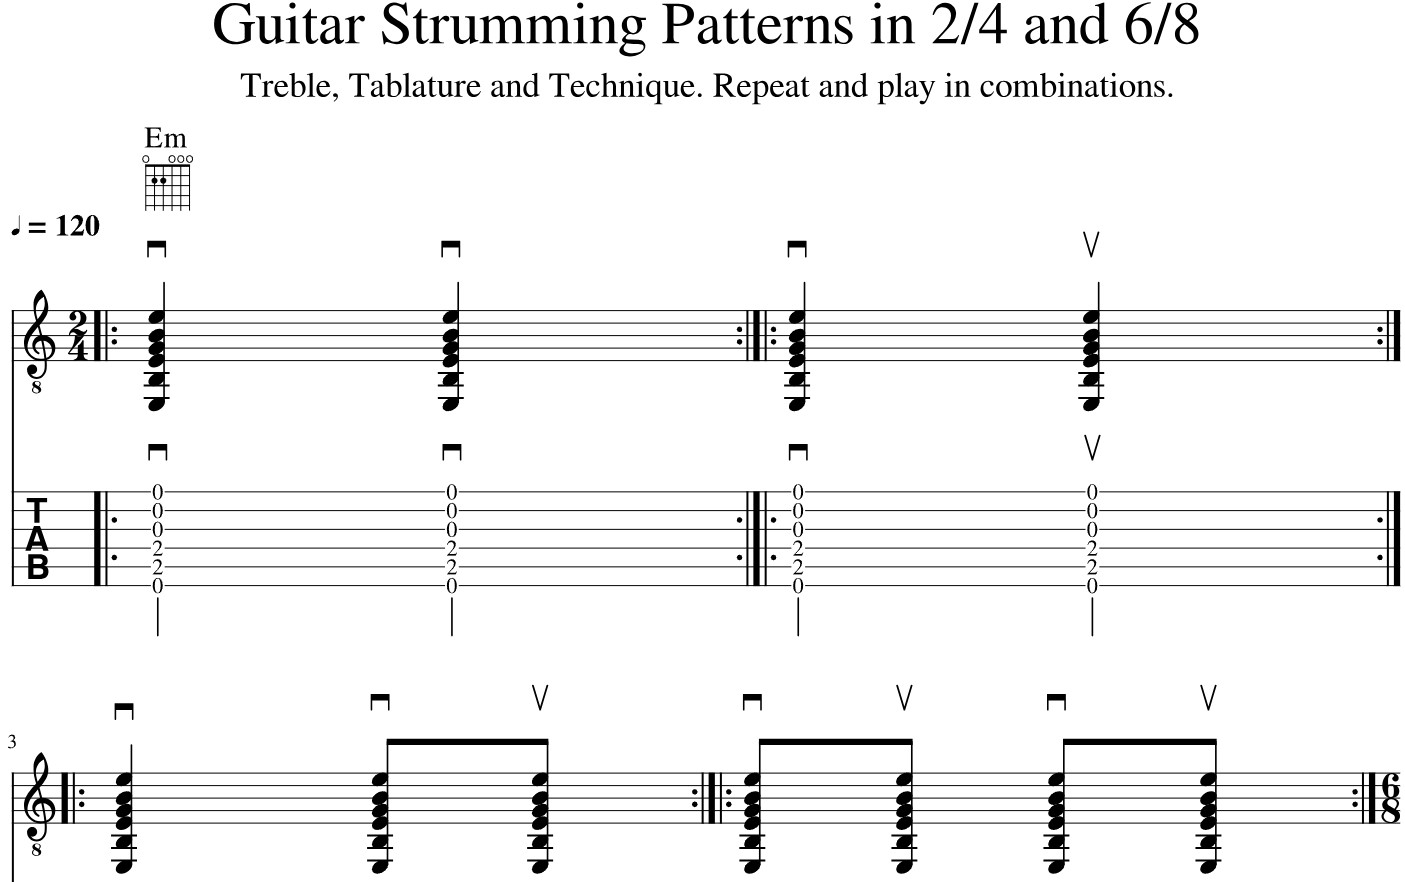 How To Read Strumming Patterns On Sheet Music